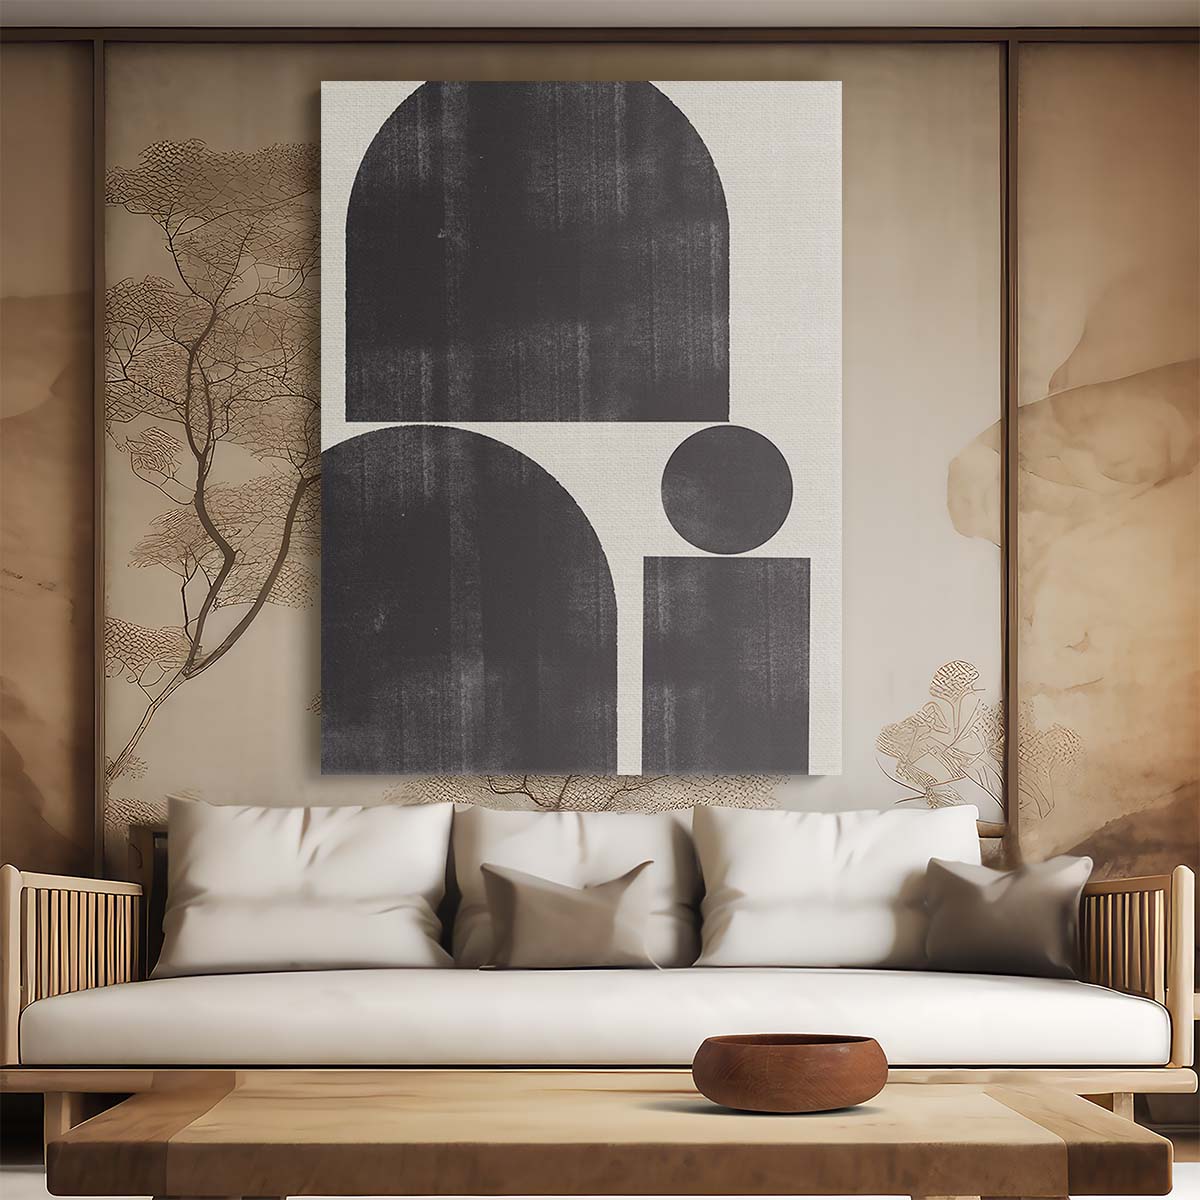 Abstract Geometric Illustration Art, Shape Study No1 by MIUUS Studio by Luxuriance Designs, made in USA